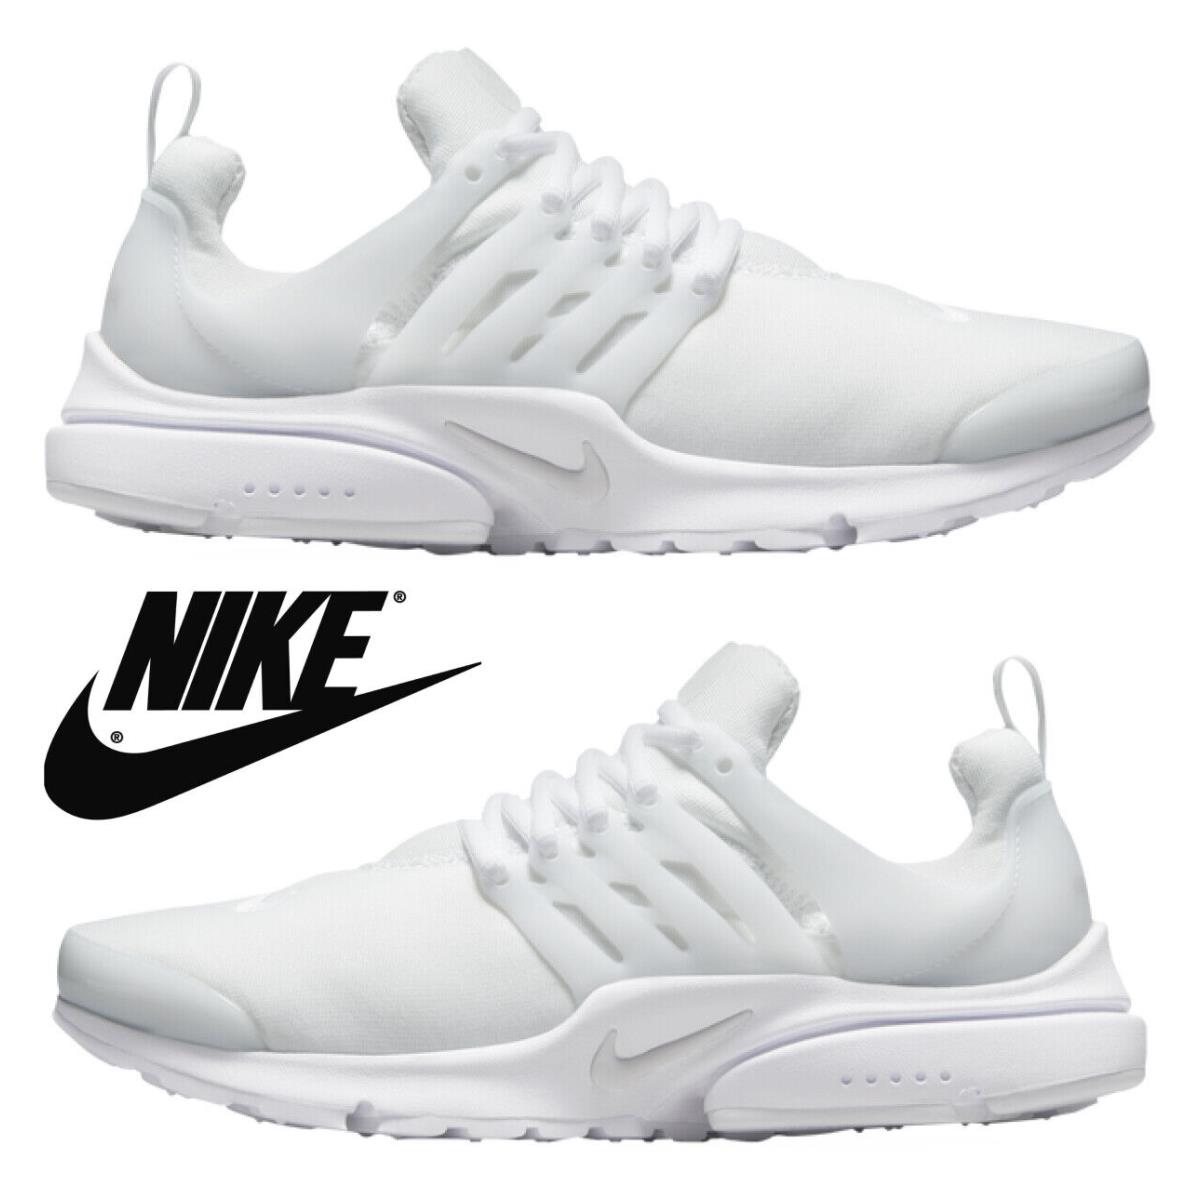 Nike Air Presto Running Sneakers Men`s Athletic Comfort Casual Shoes White - White , White/Grey Manufacturer